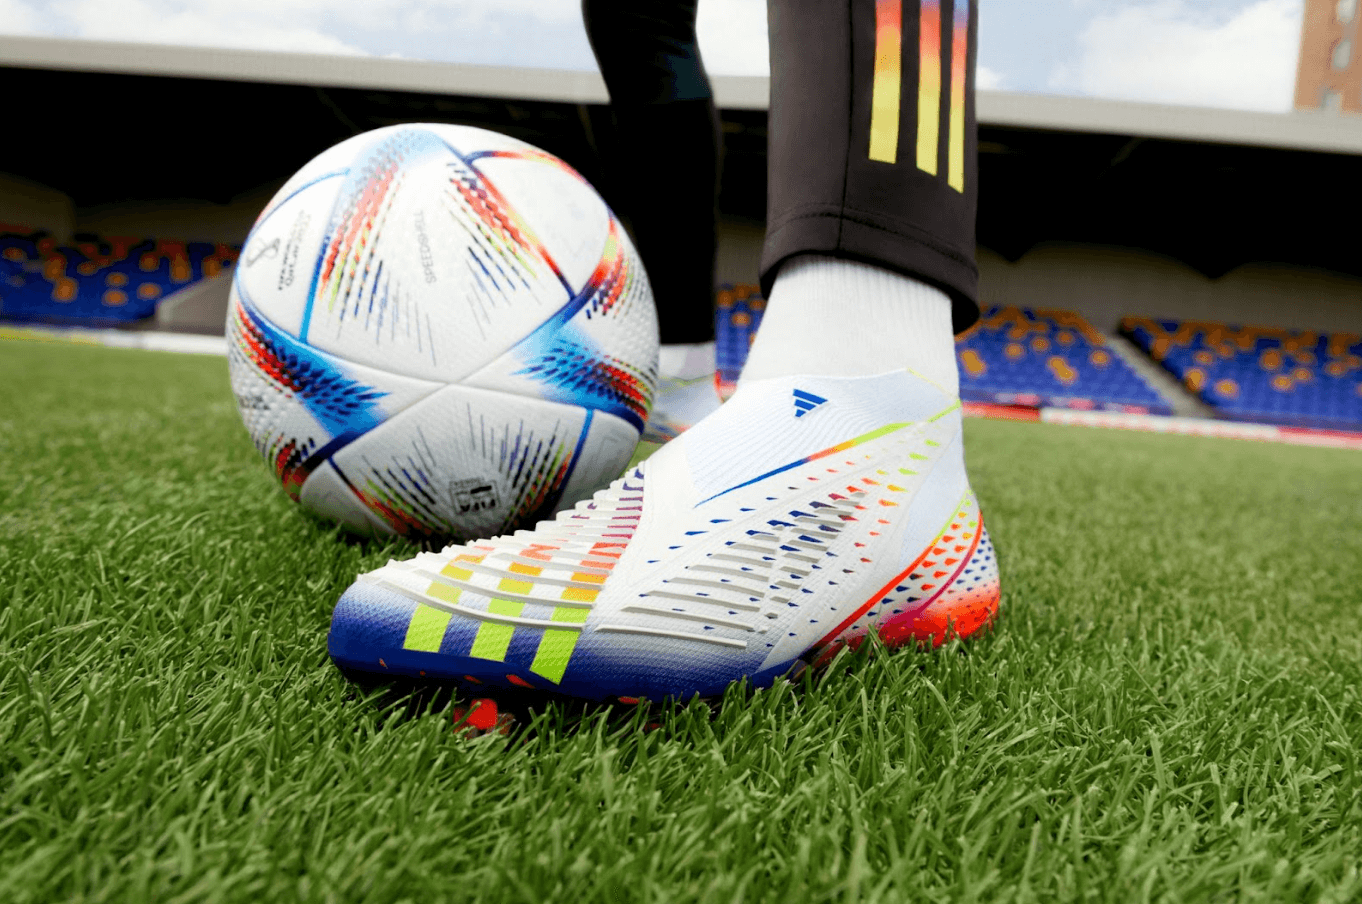 The design of the Adidas Al Rihla boots represents a significant shift from a more conventional Adidas boot, with the company’s trademark three stripes relocated from their usual location on the side of the boot to the front of the cleat.